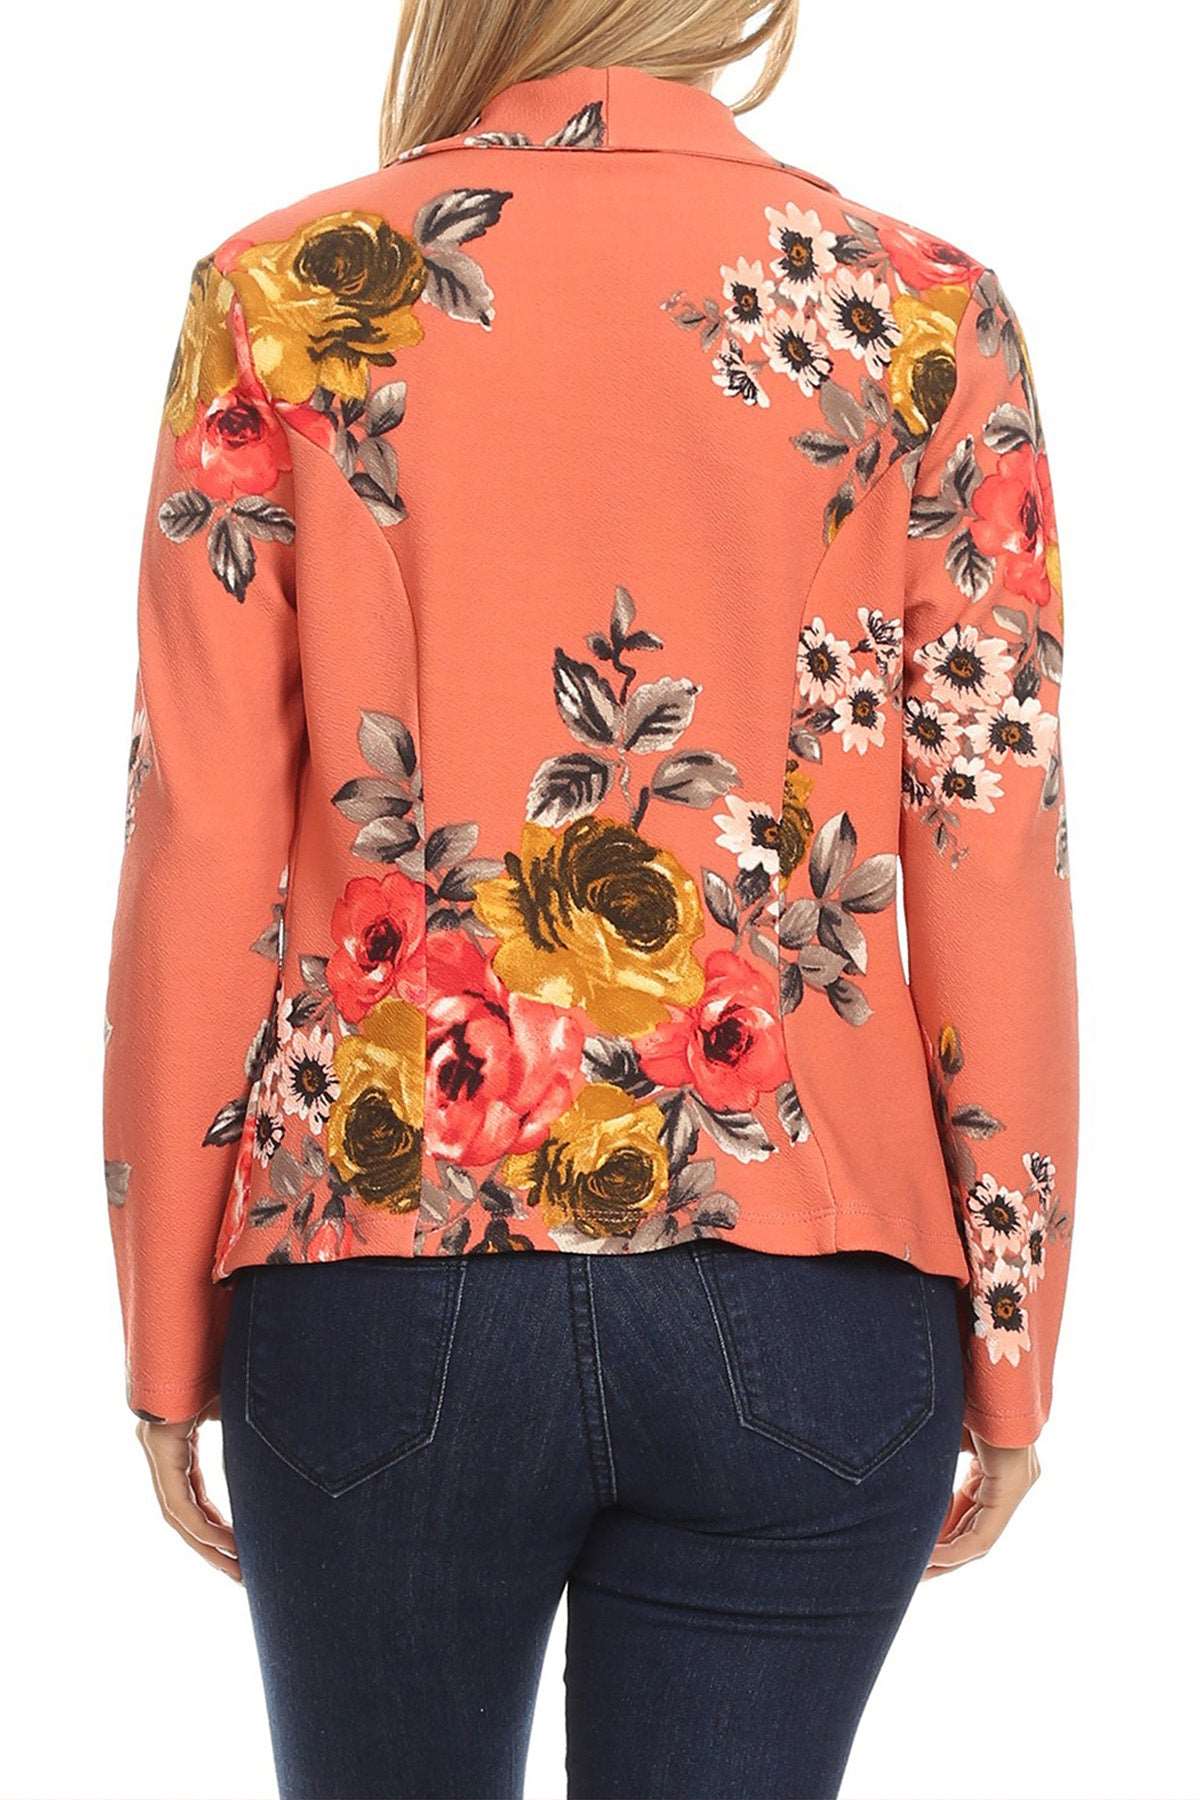 Women's Casual Floral Print Fitted Open Front Long Sleeves Office Blazer Jacket